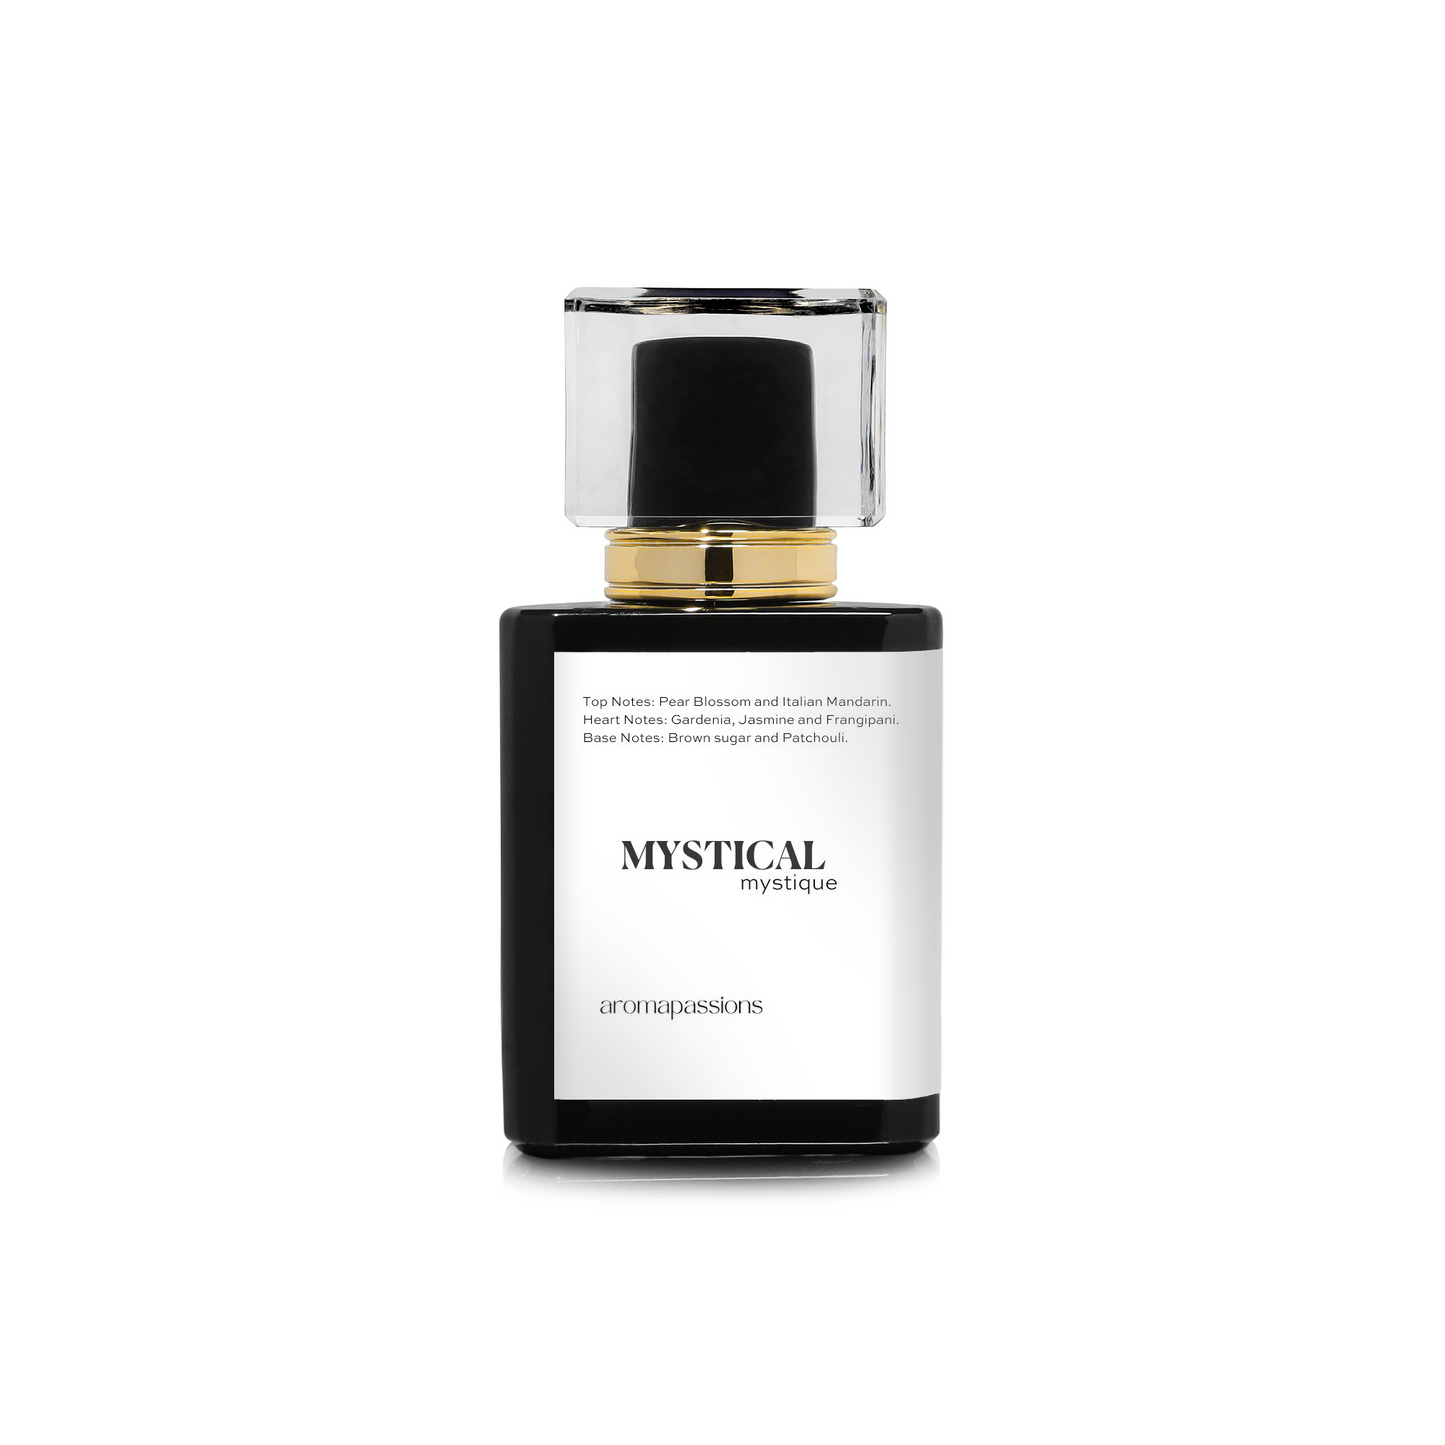 MYSTICAL | Inspired by GUCCI FLORA GORGEOUS GARDENIA | Flora Gorgeous Gardenia Dupe Pheromone Perfume